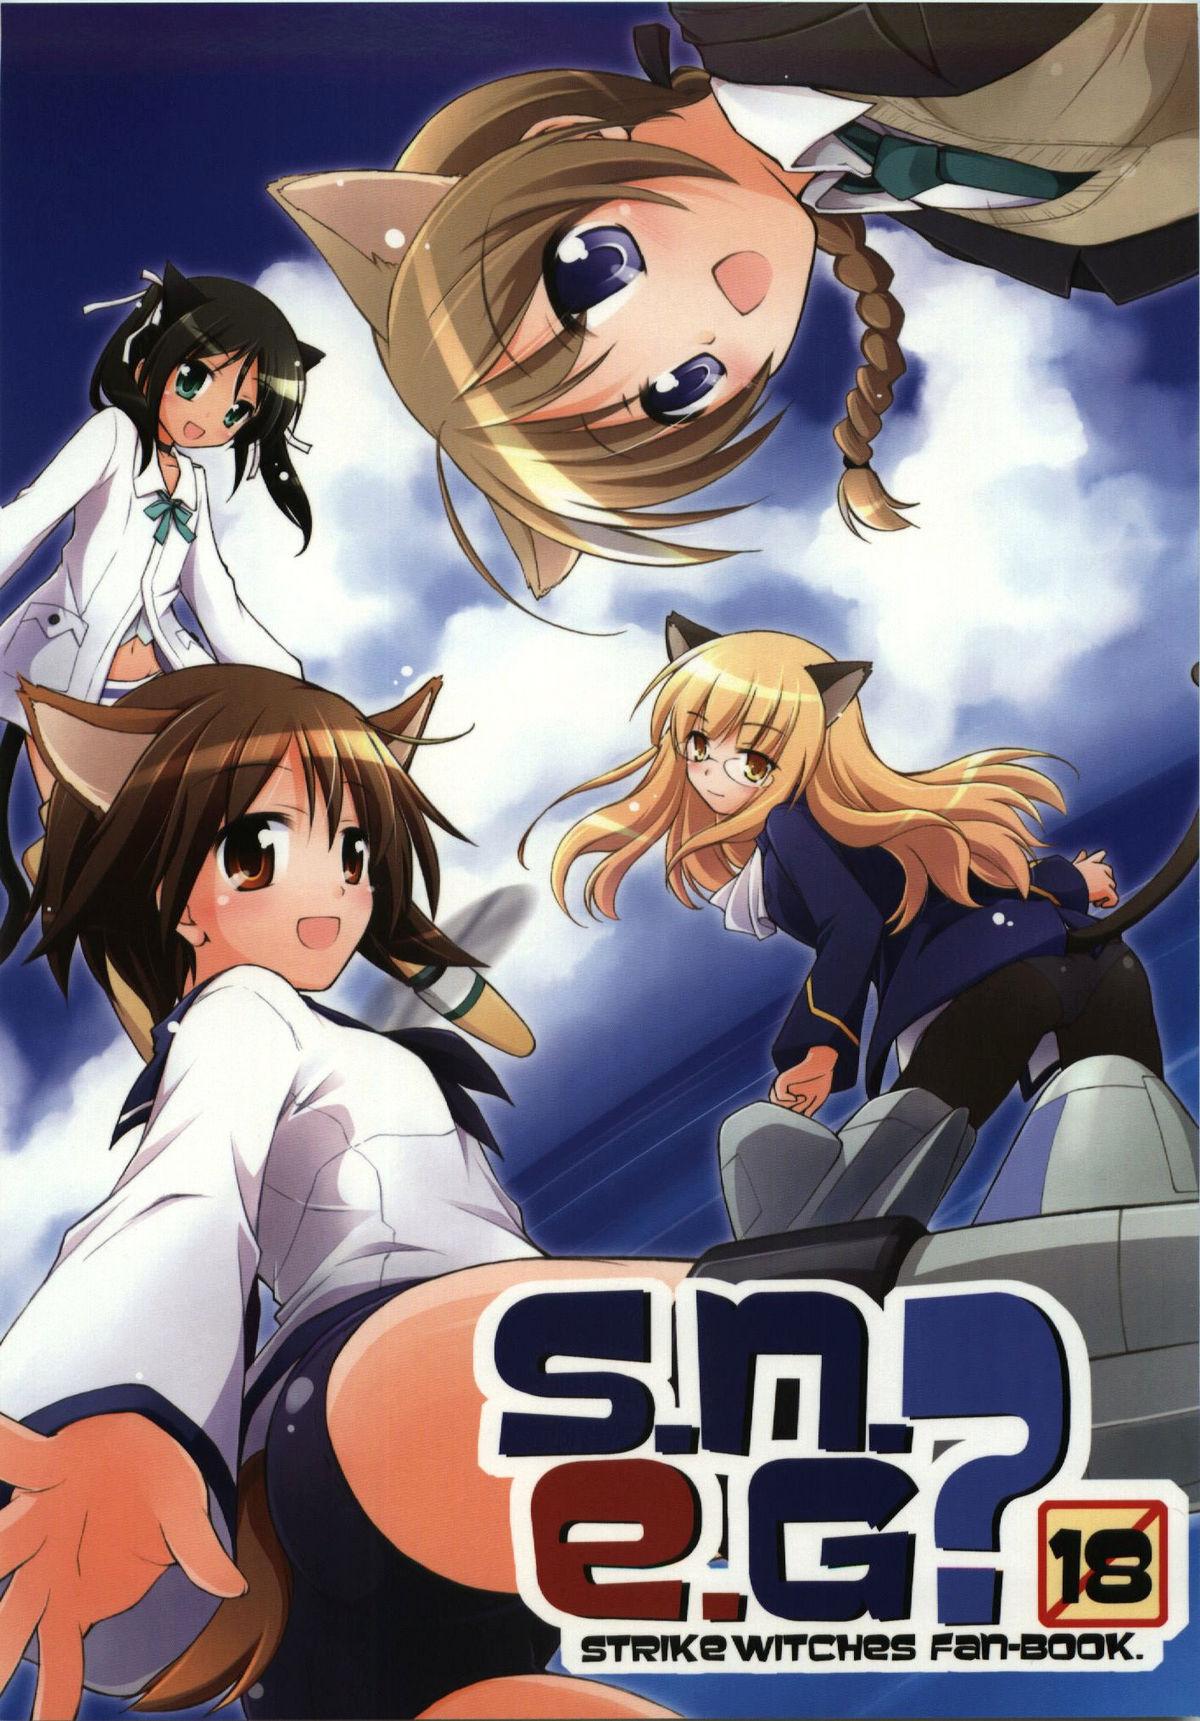 Blowjob s.n.e.g? - Strike witches Flaca - Picture 1